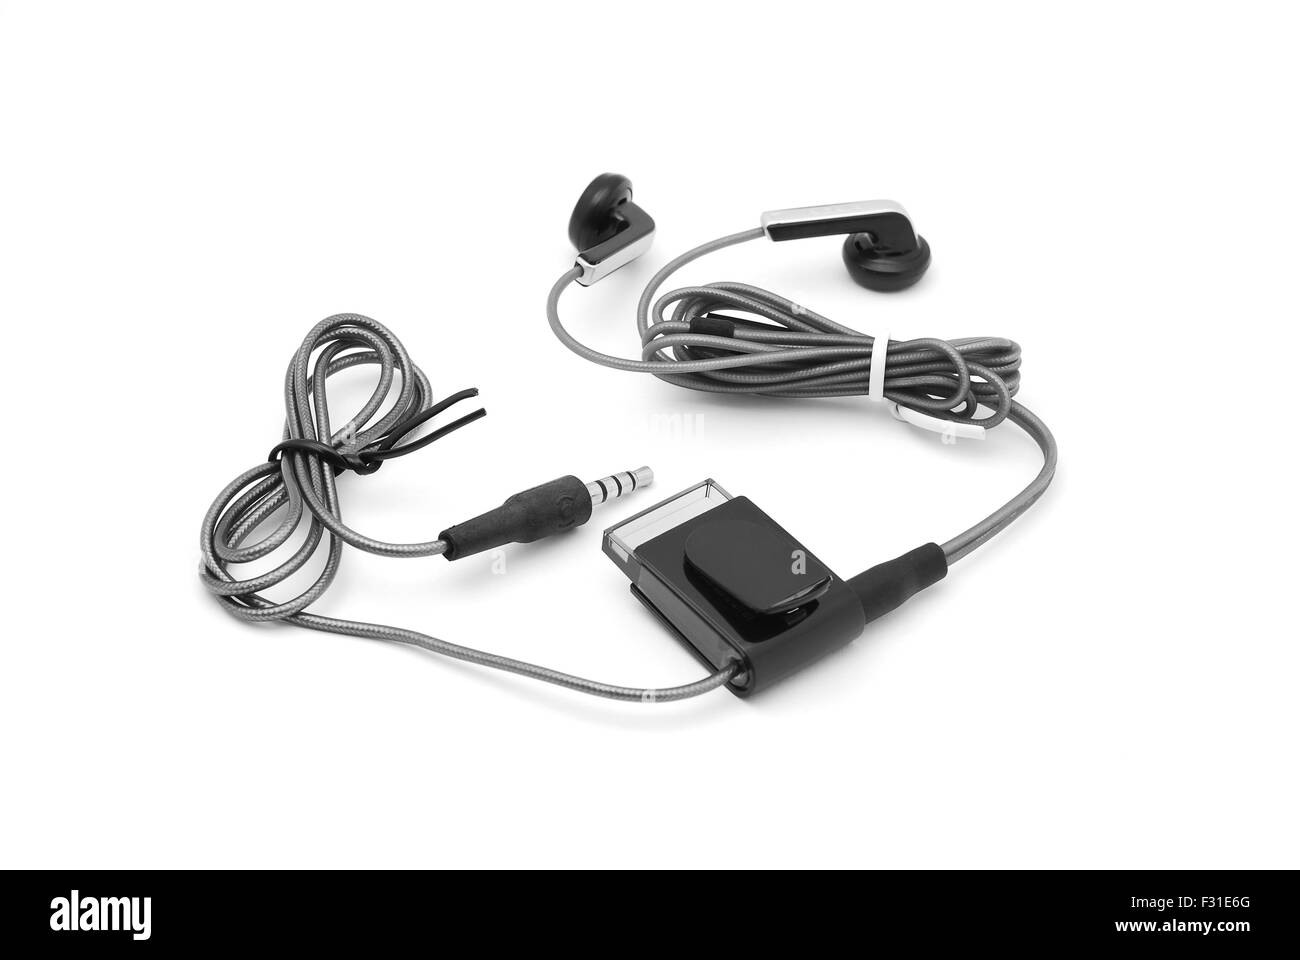 hands free earphones on white background Stock Photo